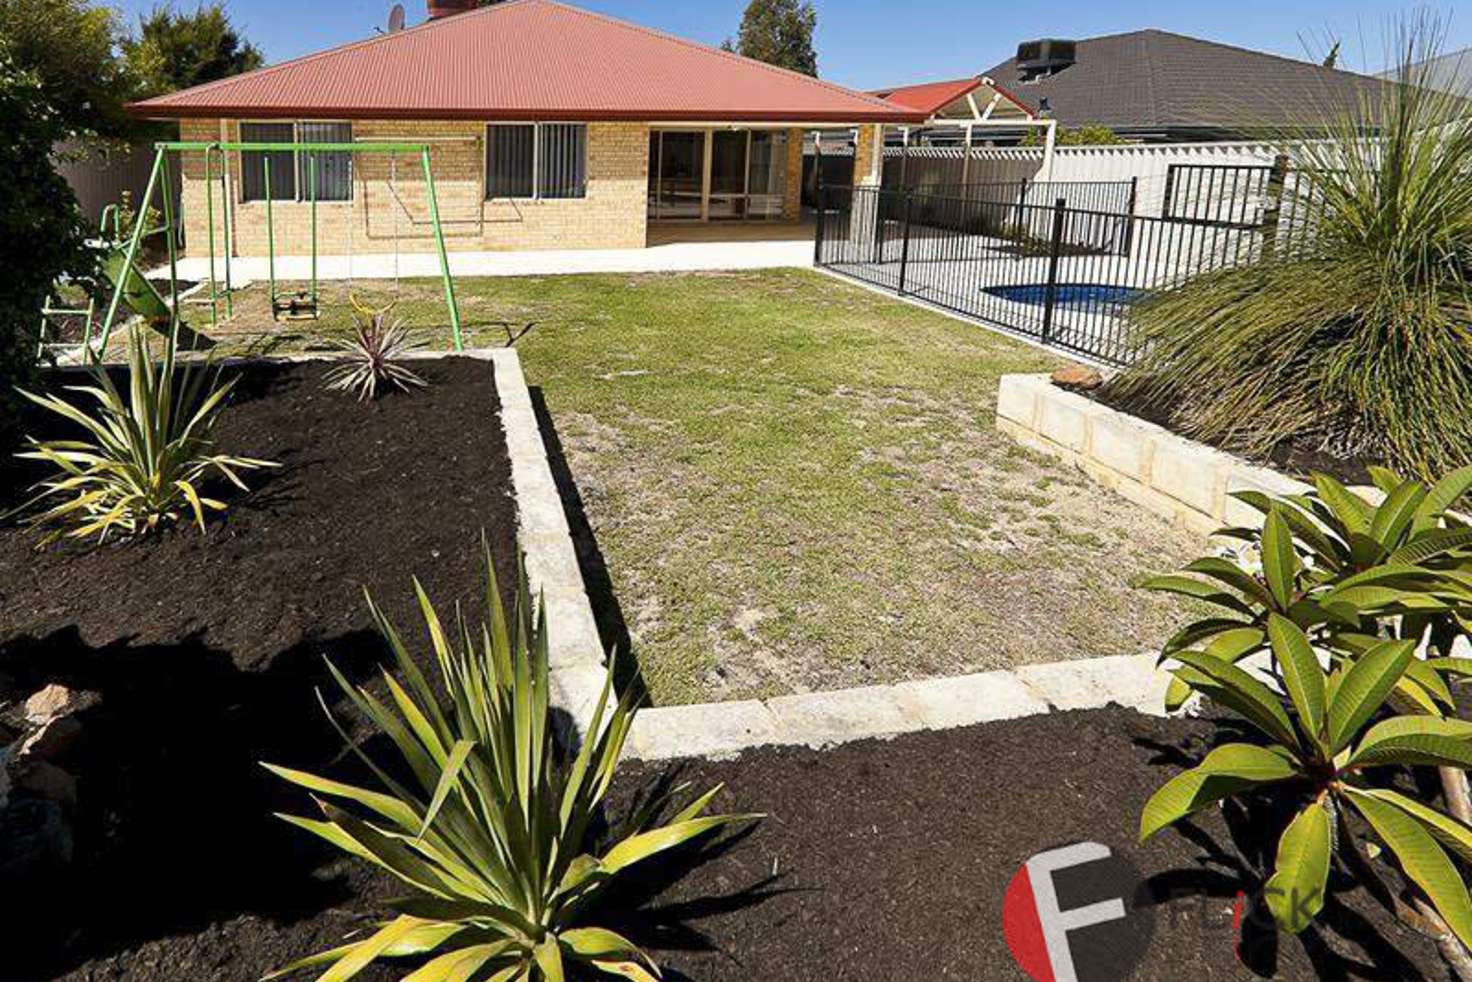 Main view of Homely house listing, 75 Millendon St, Carramar WA 6031